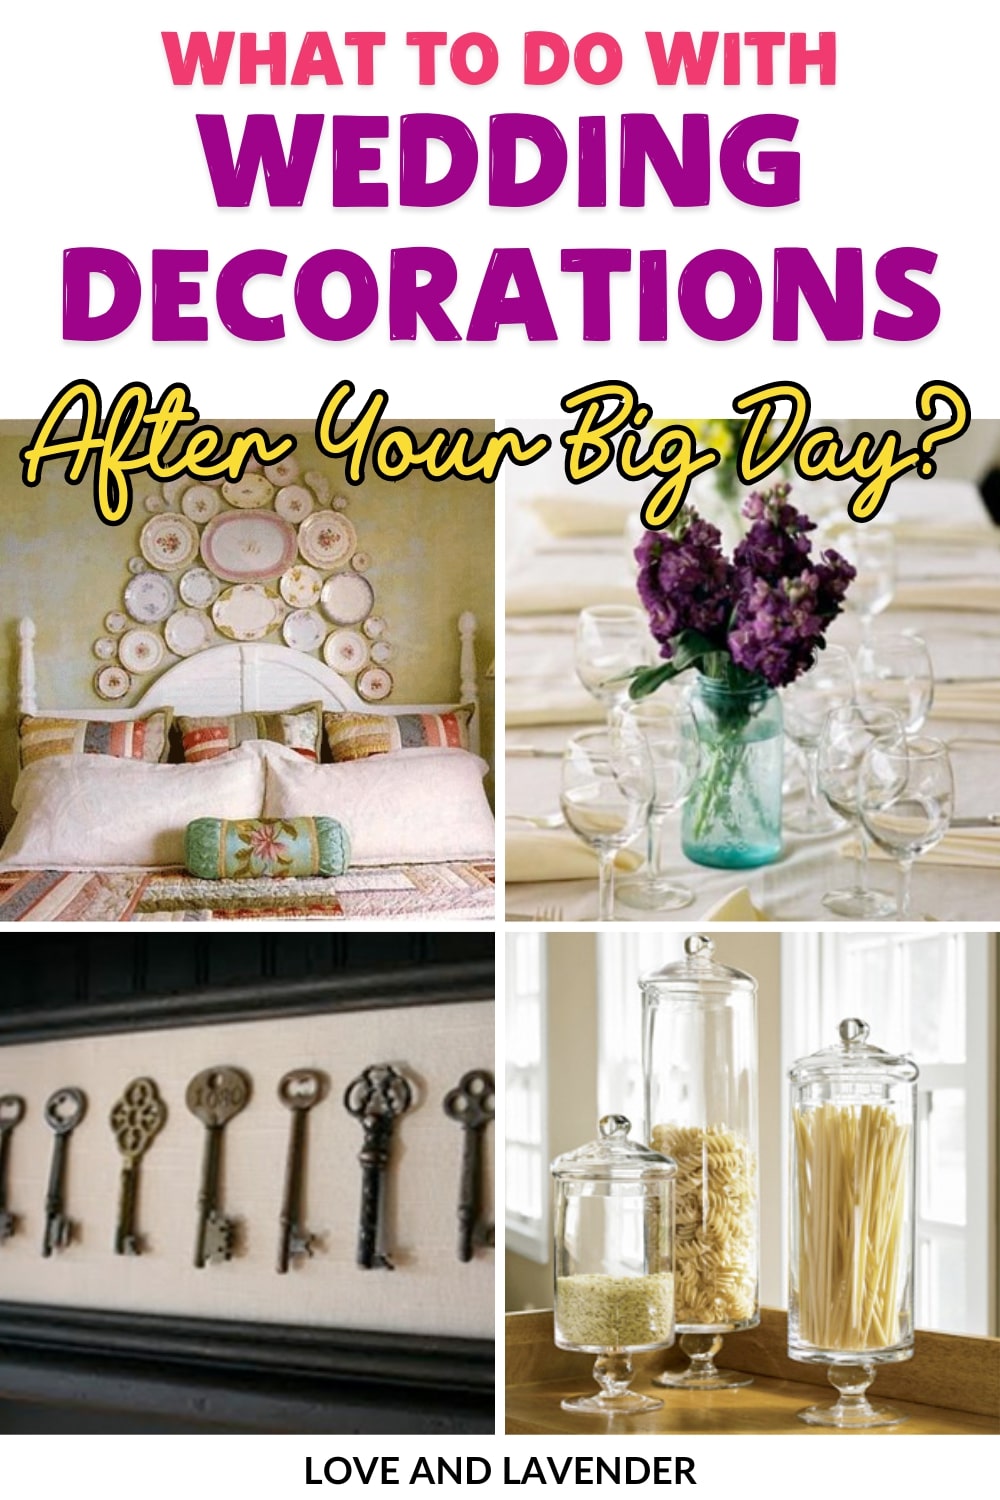 Had a blast at your wedding but not sure what to do with all the decorations now? In this blog post, we'll be sharing ideas on how to repurpose your wedding decor into fabulous home decor! See more .